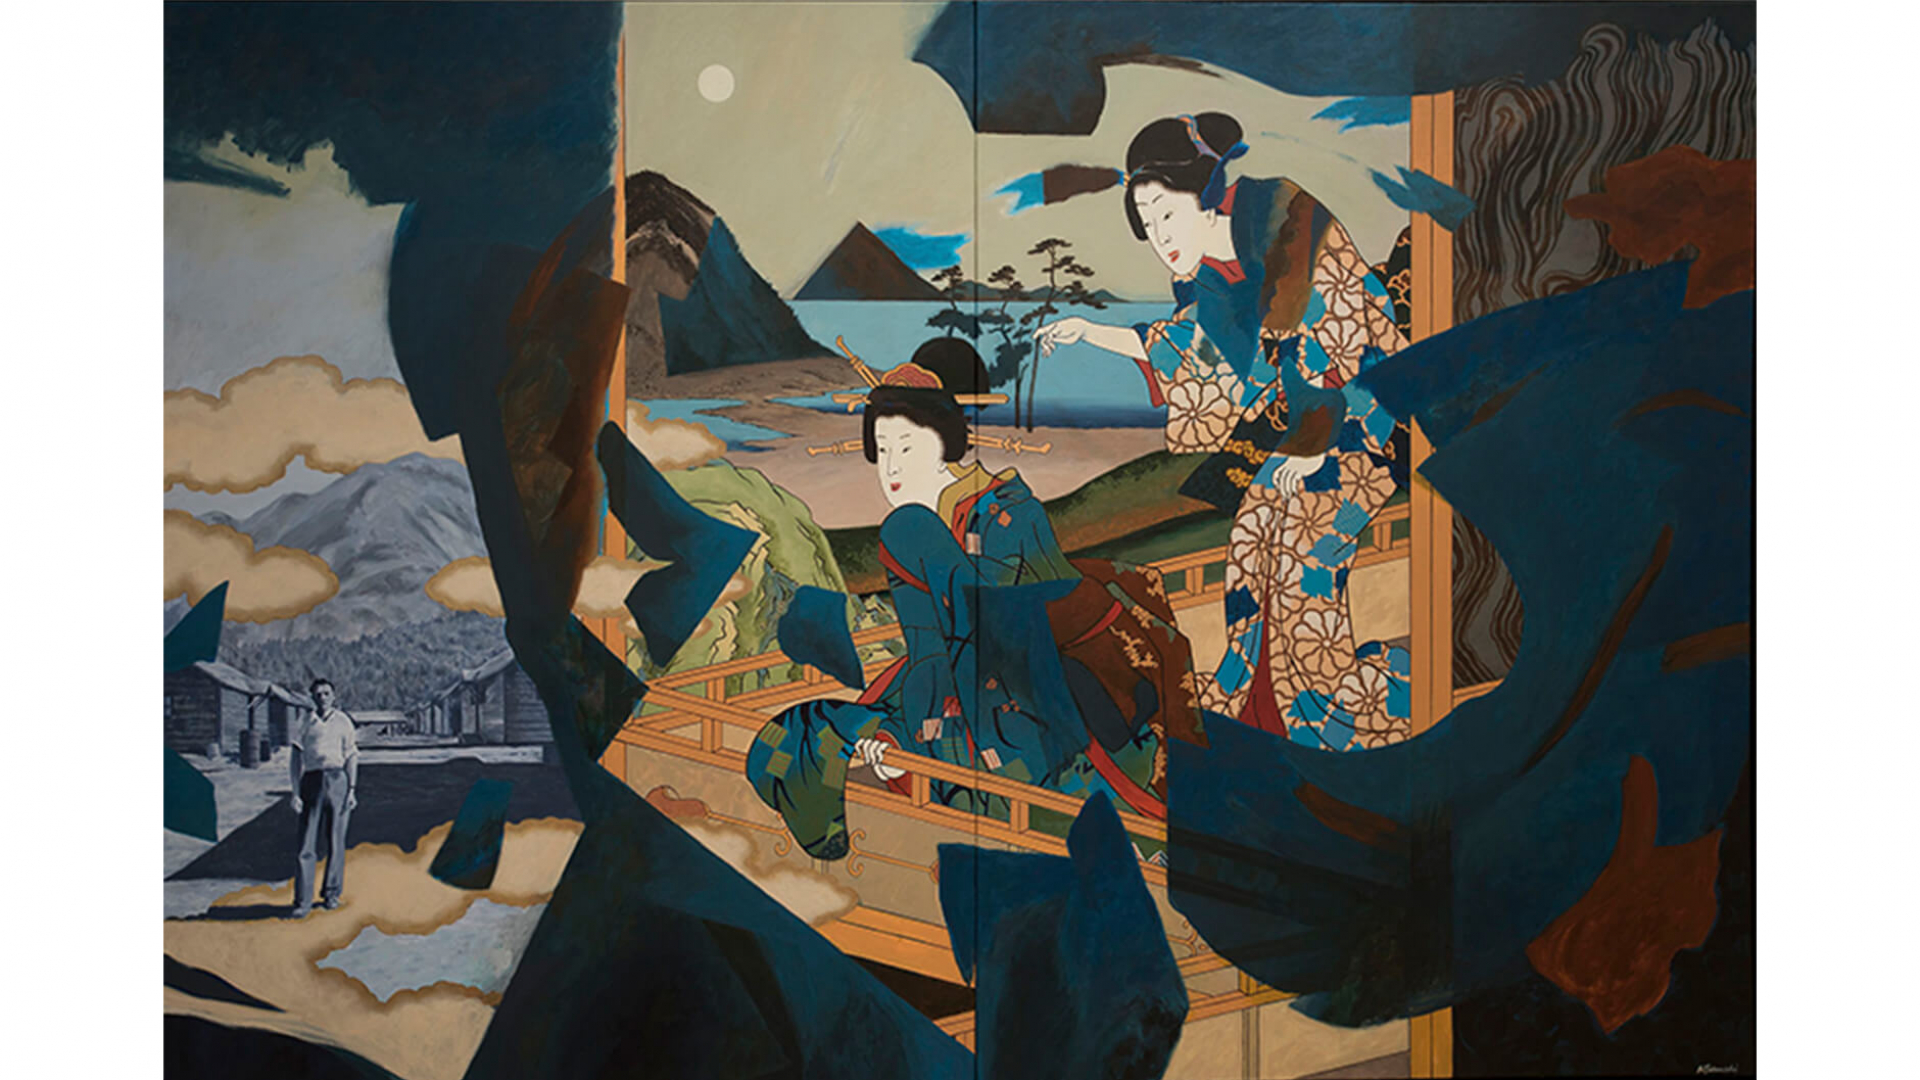 Painting of a resident from a BC internment camp and kimono-clad women from a 19th century ukiyo-e print.